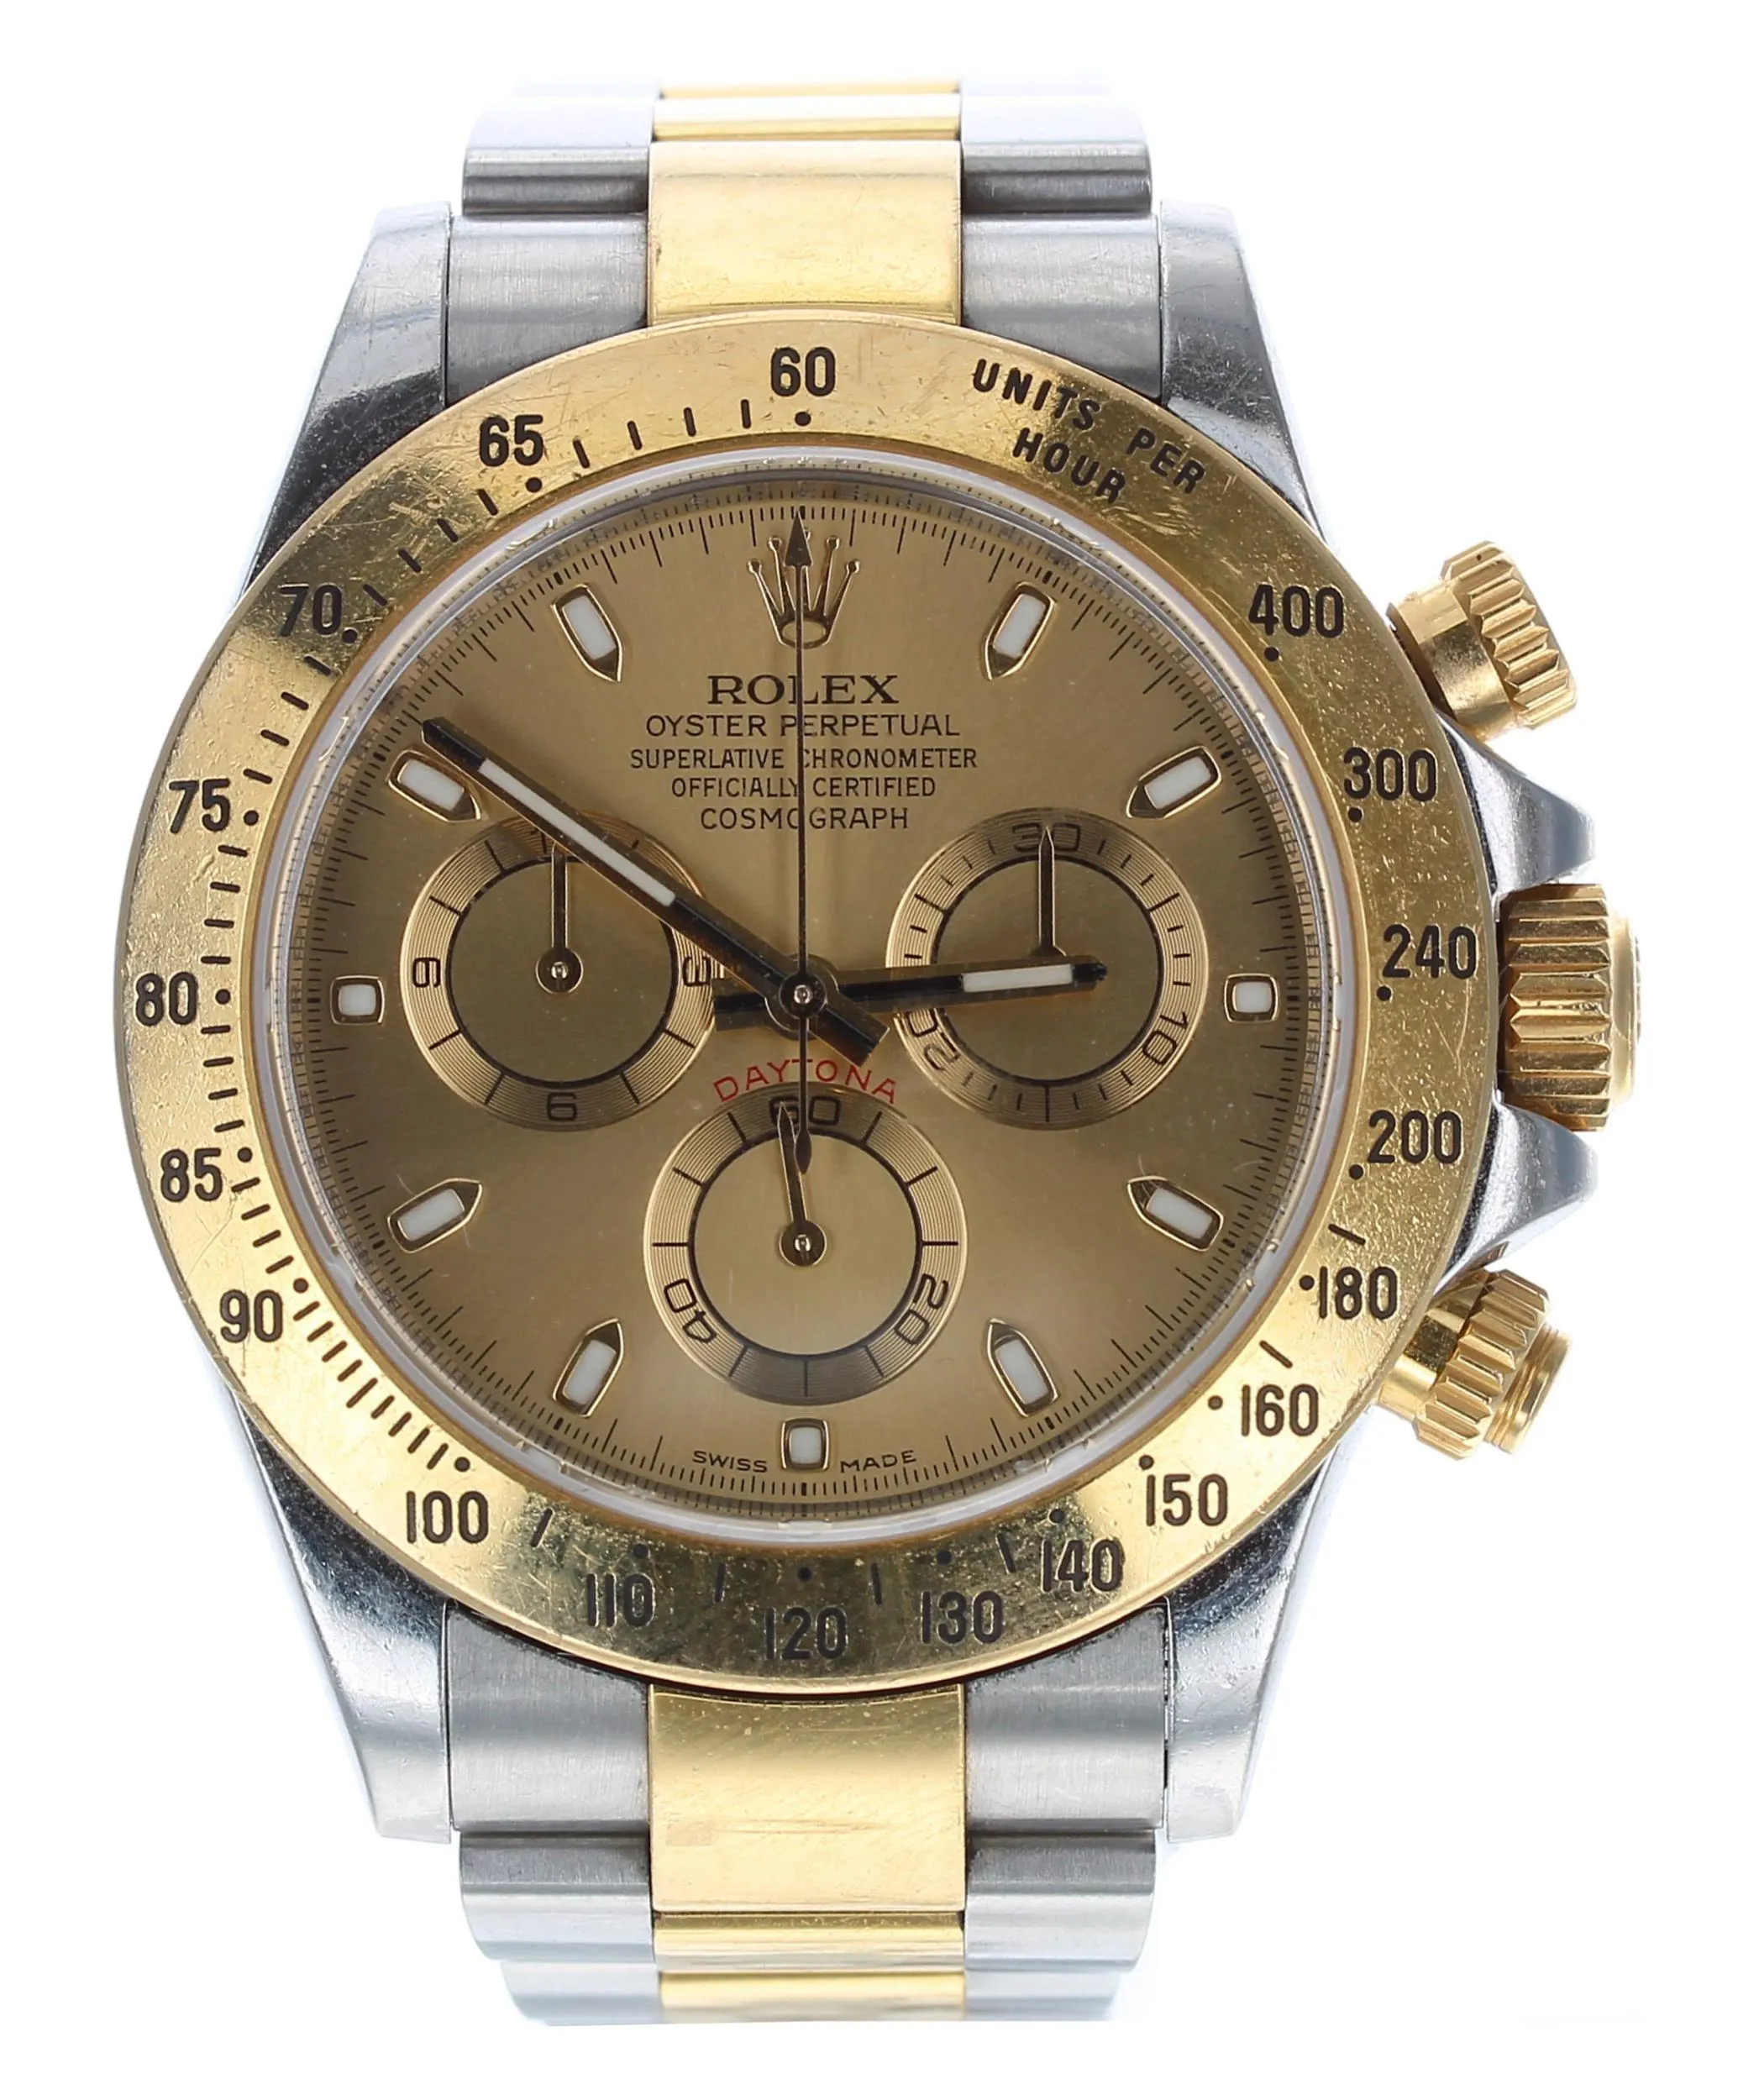 Rolex Daytona 116523 42mm Yellow gold and stainless steel Champagne